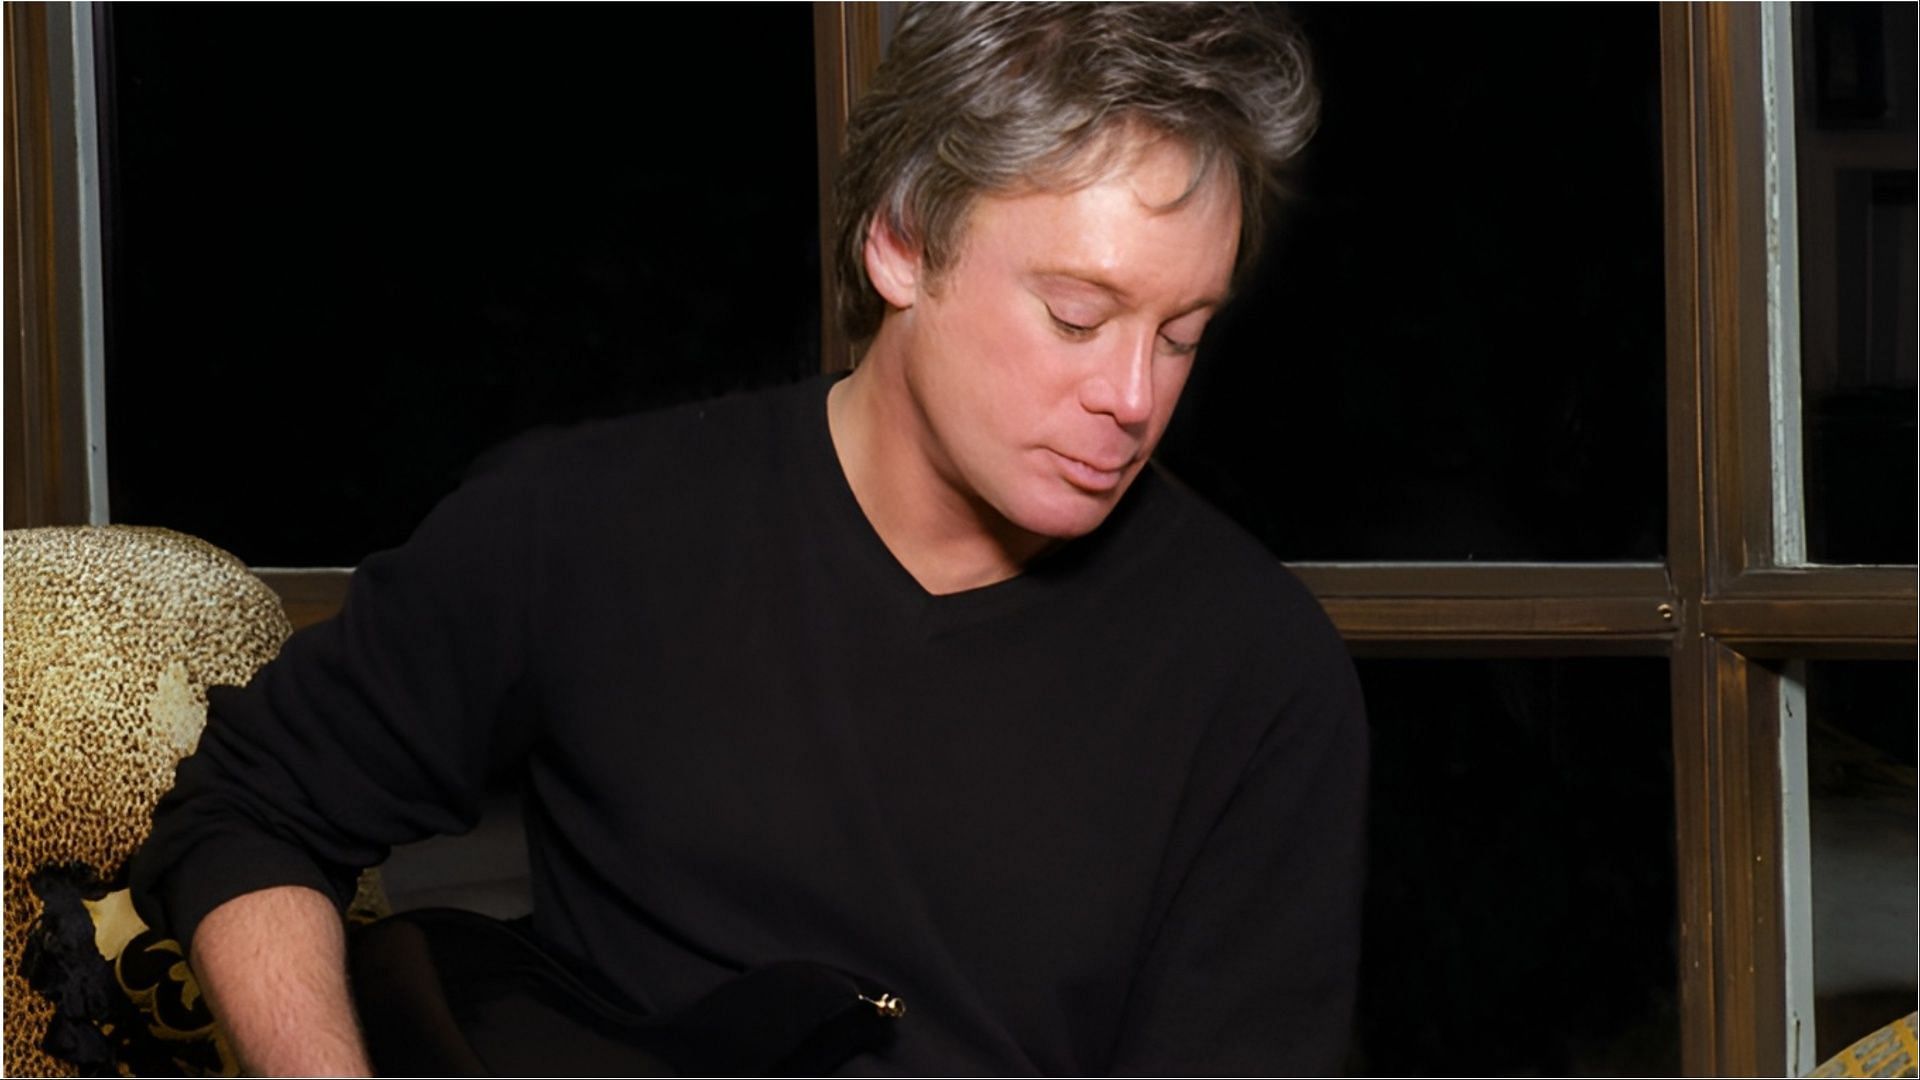 Eric Carmen has unexpectedly died at the age of 74 (Image via Eric Carmen)